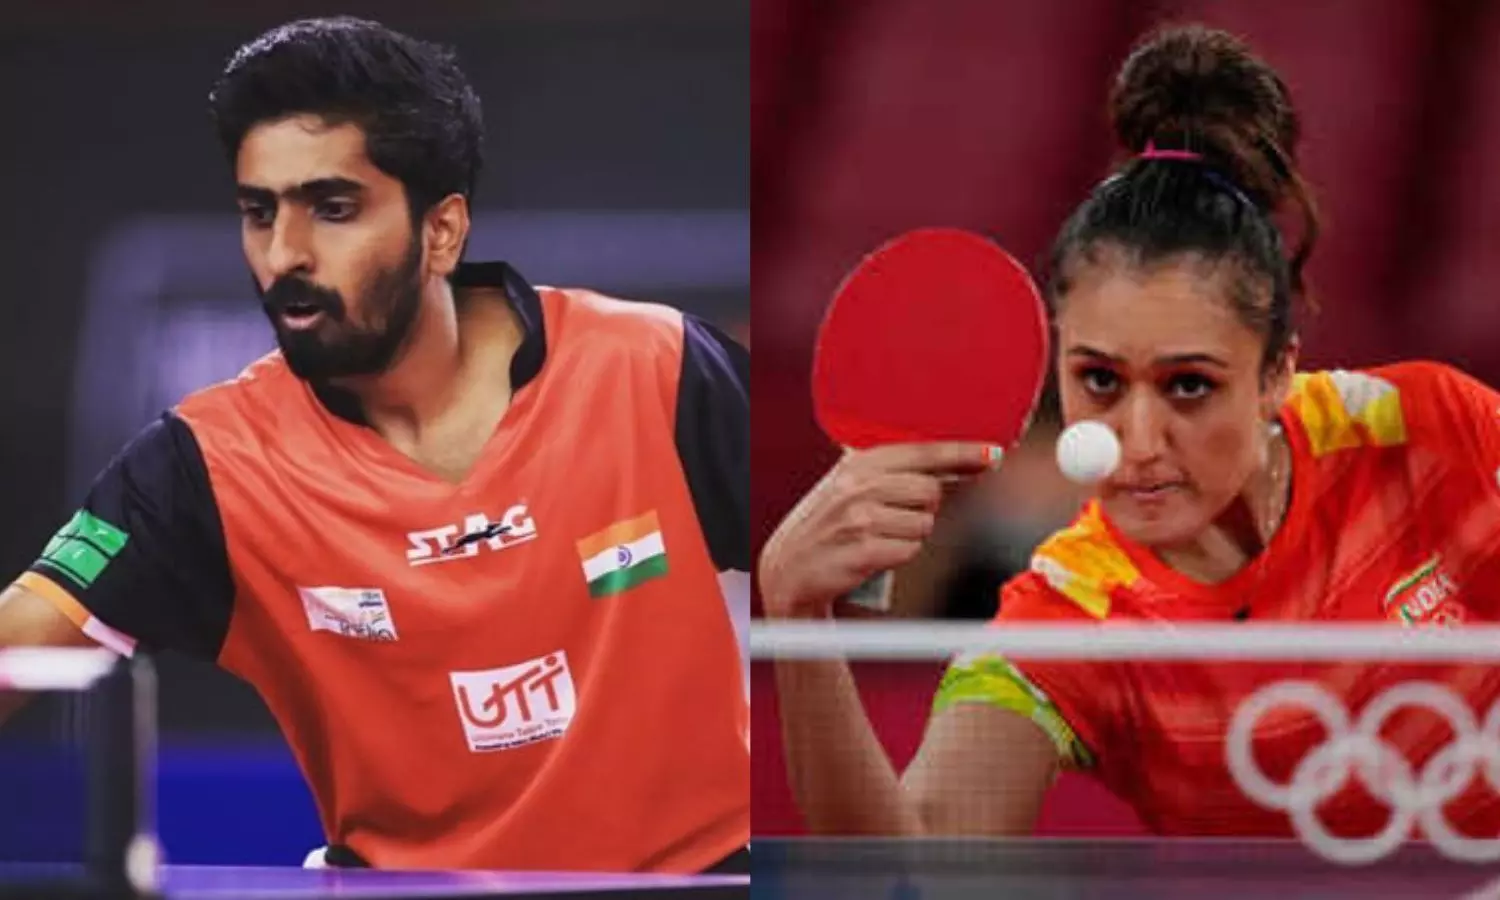 Tokyo Olympics Table Tennis LIVE Day 2, July 25 — Sathiyan and Manika to start the day — Updates, score, results, blog